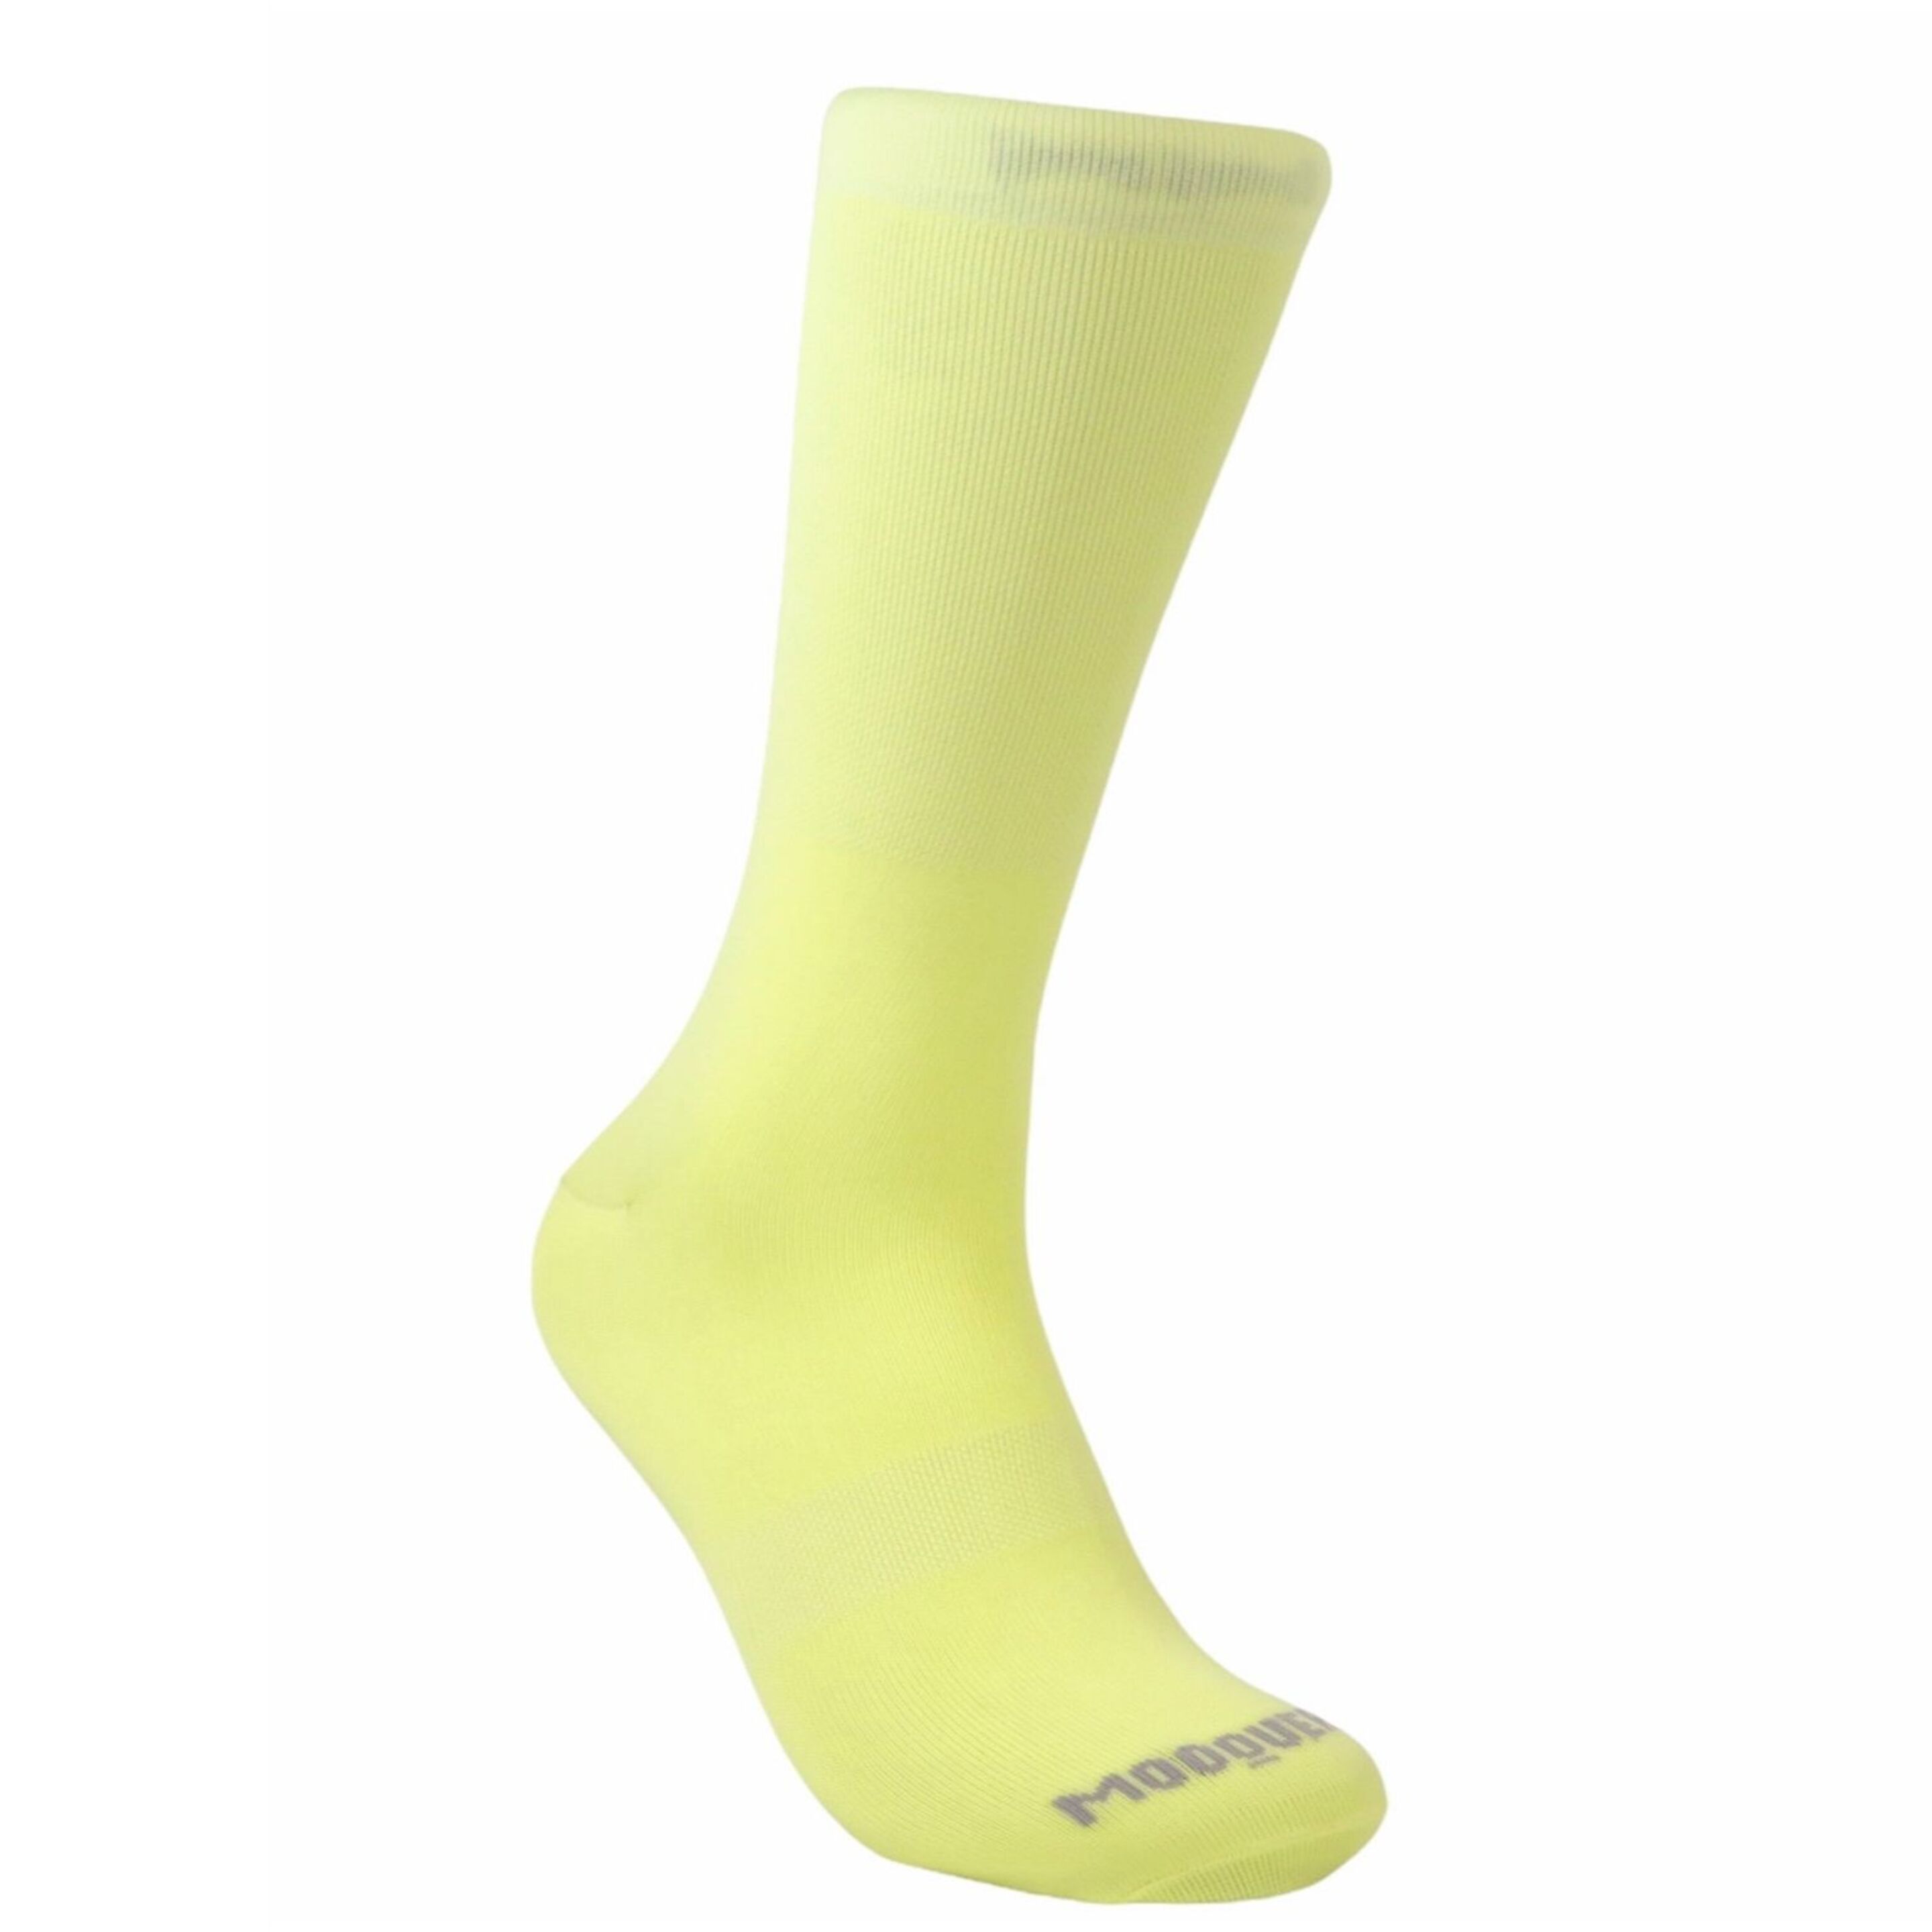 Meias Ciclismo Mooquer Classy Yellow - Amarelo | Sport Zone MKP